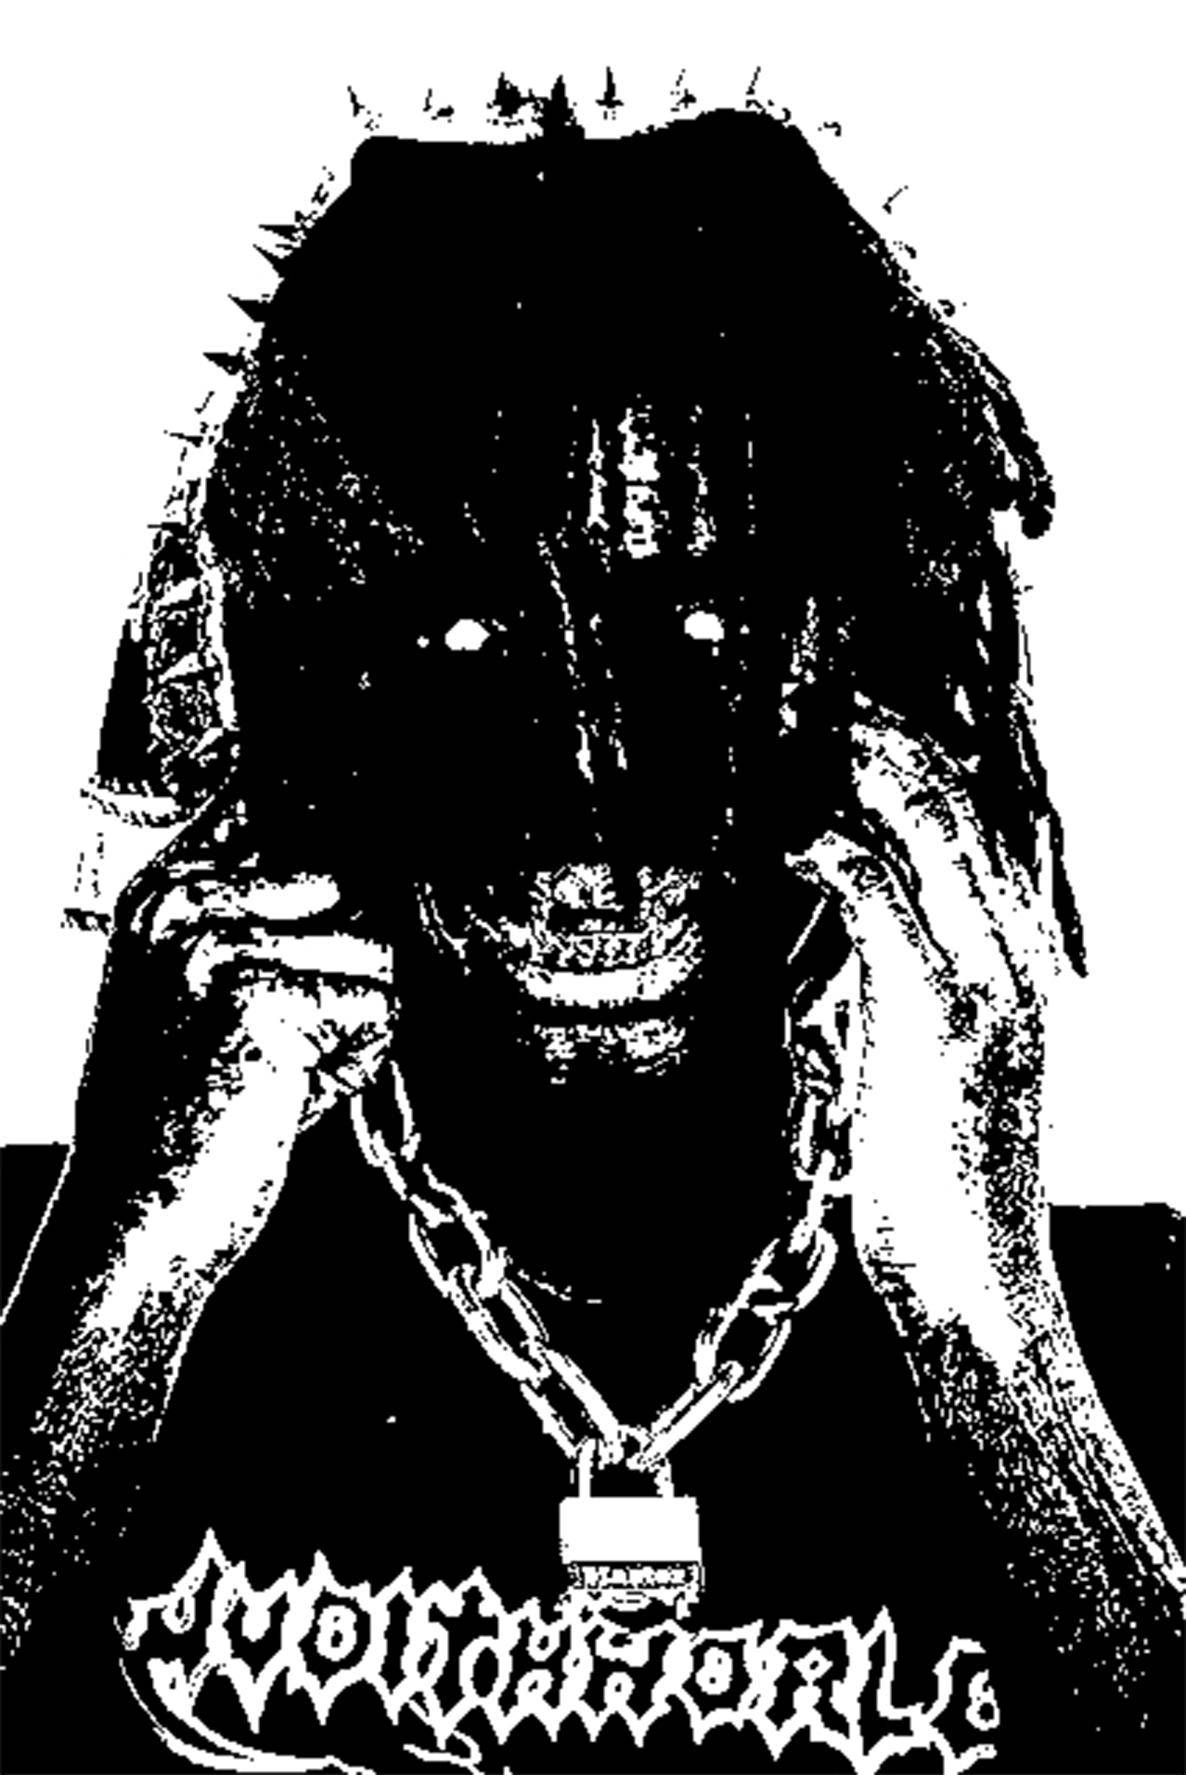 "Experience the newest sound from genre-defining artist Zillakami" Wallpaper